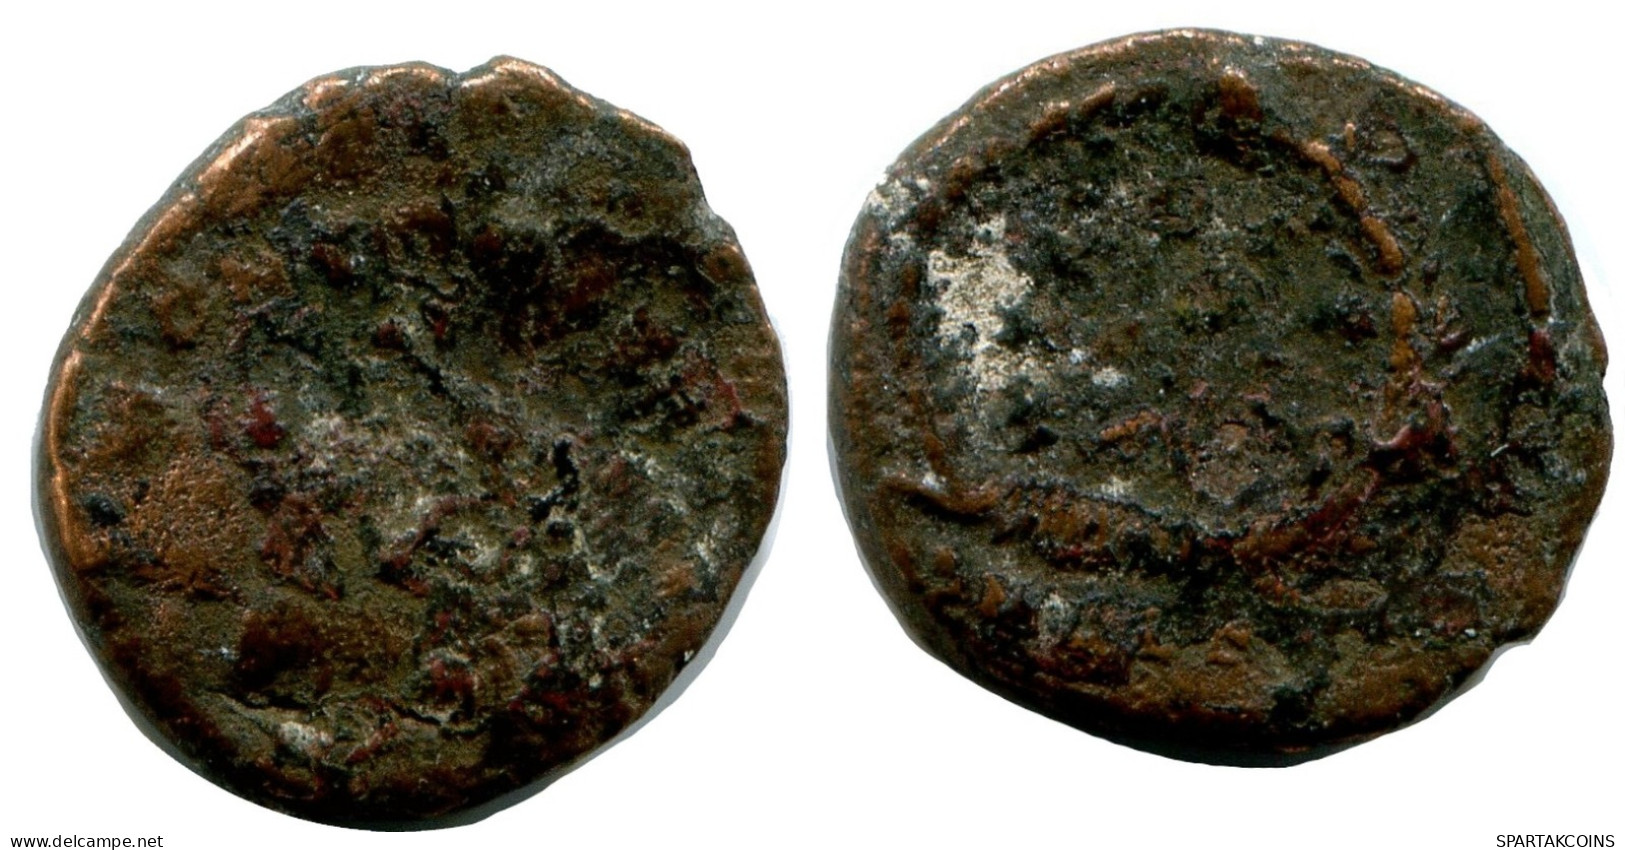 ROMAN Pièce MINTED IN ALEKSANDRIA FROM THE ROYAL ONTARIO MUSEUM #ANC10192.14.F.A - El Imperio Christiano (307 / 363)